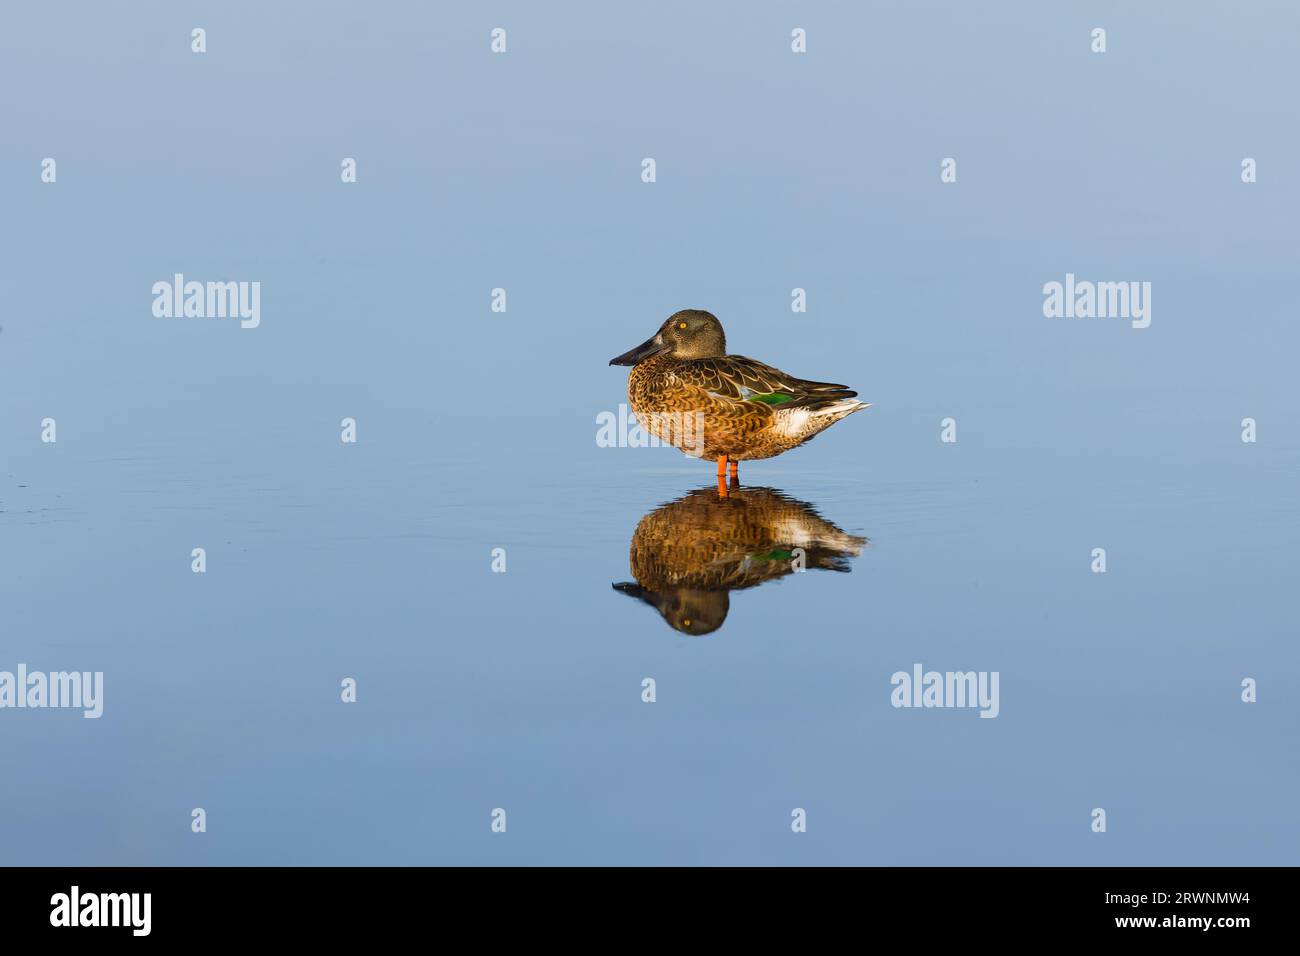 Northern shoveler Anas clypeata, eclipse plumage adult male standing in shallow water with reflection, Minsmere RSPB reserve, Suffolk, September Stock Photo